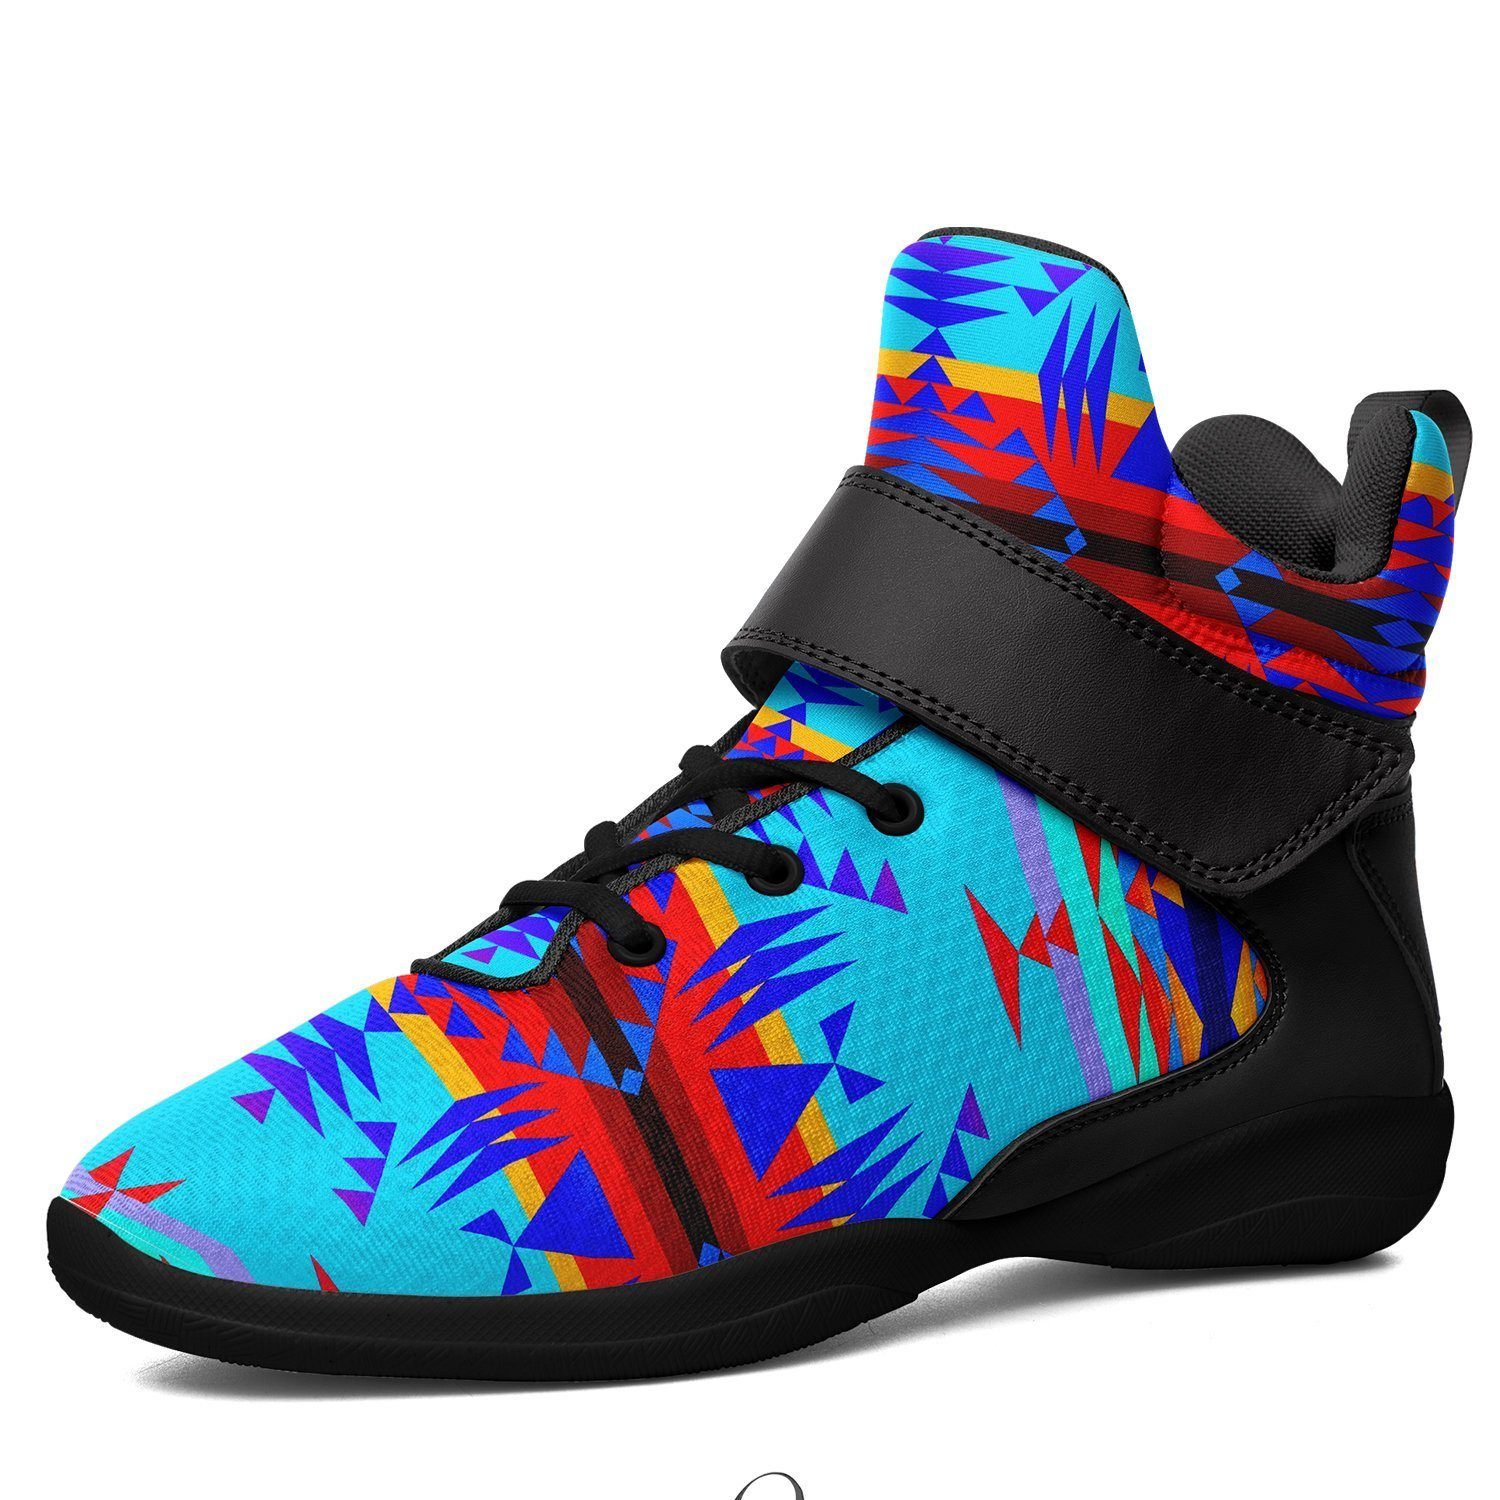 Between the Mountains Blue Ipottaa Basketball / Sport High Top Shoes - Black Sole 49 Dzine US Men 7 / EUR 40 Black Sole with Black Strap 